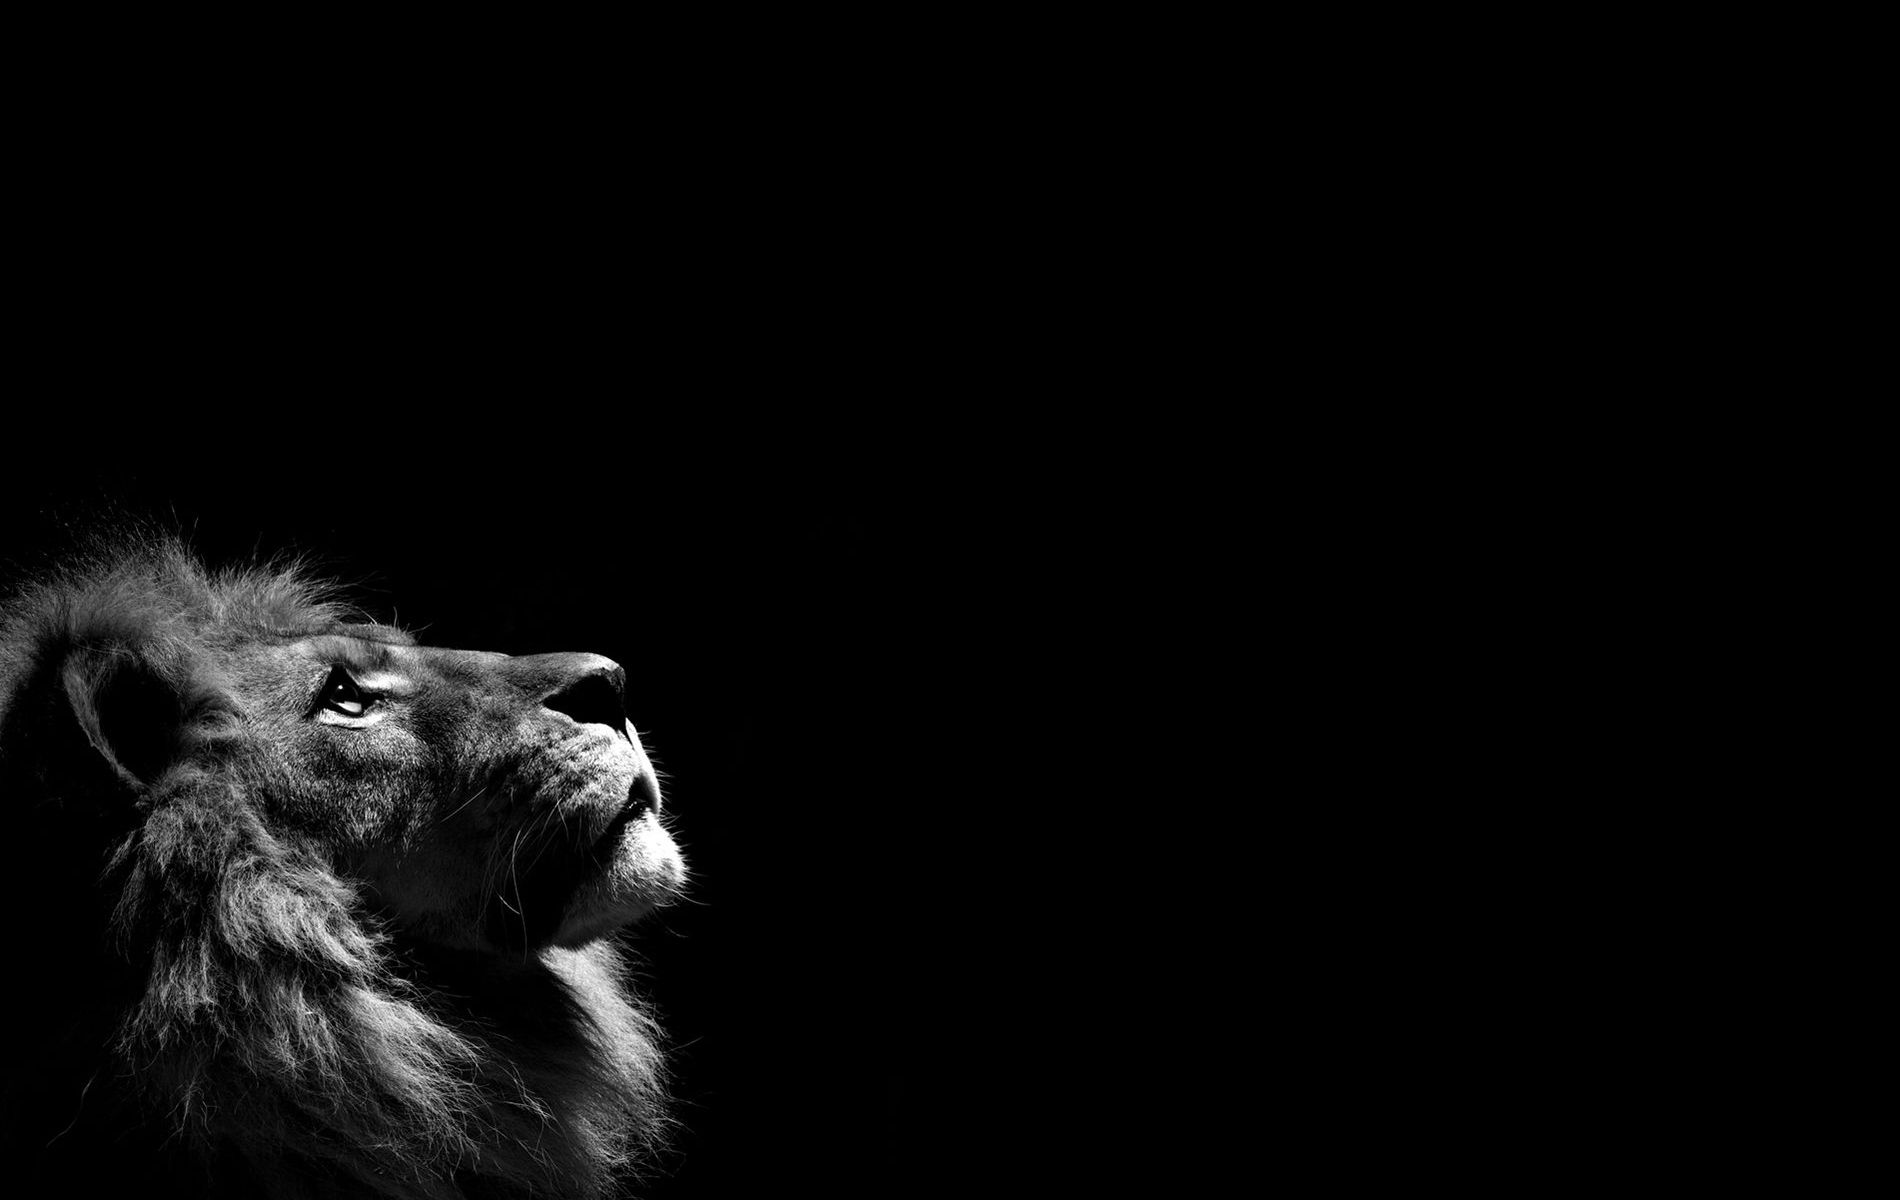 Lion Black and White High Definition Wallpapers 3119 - HD